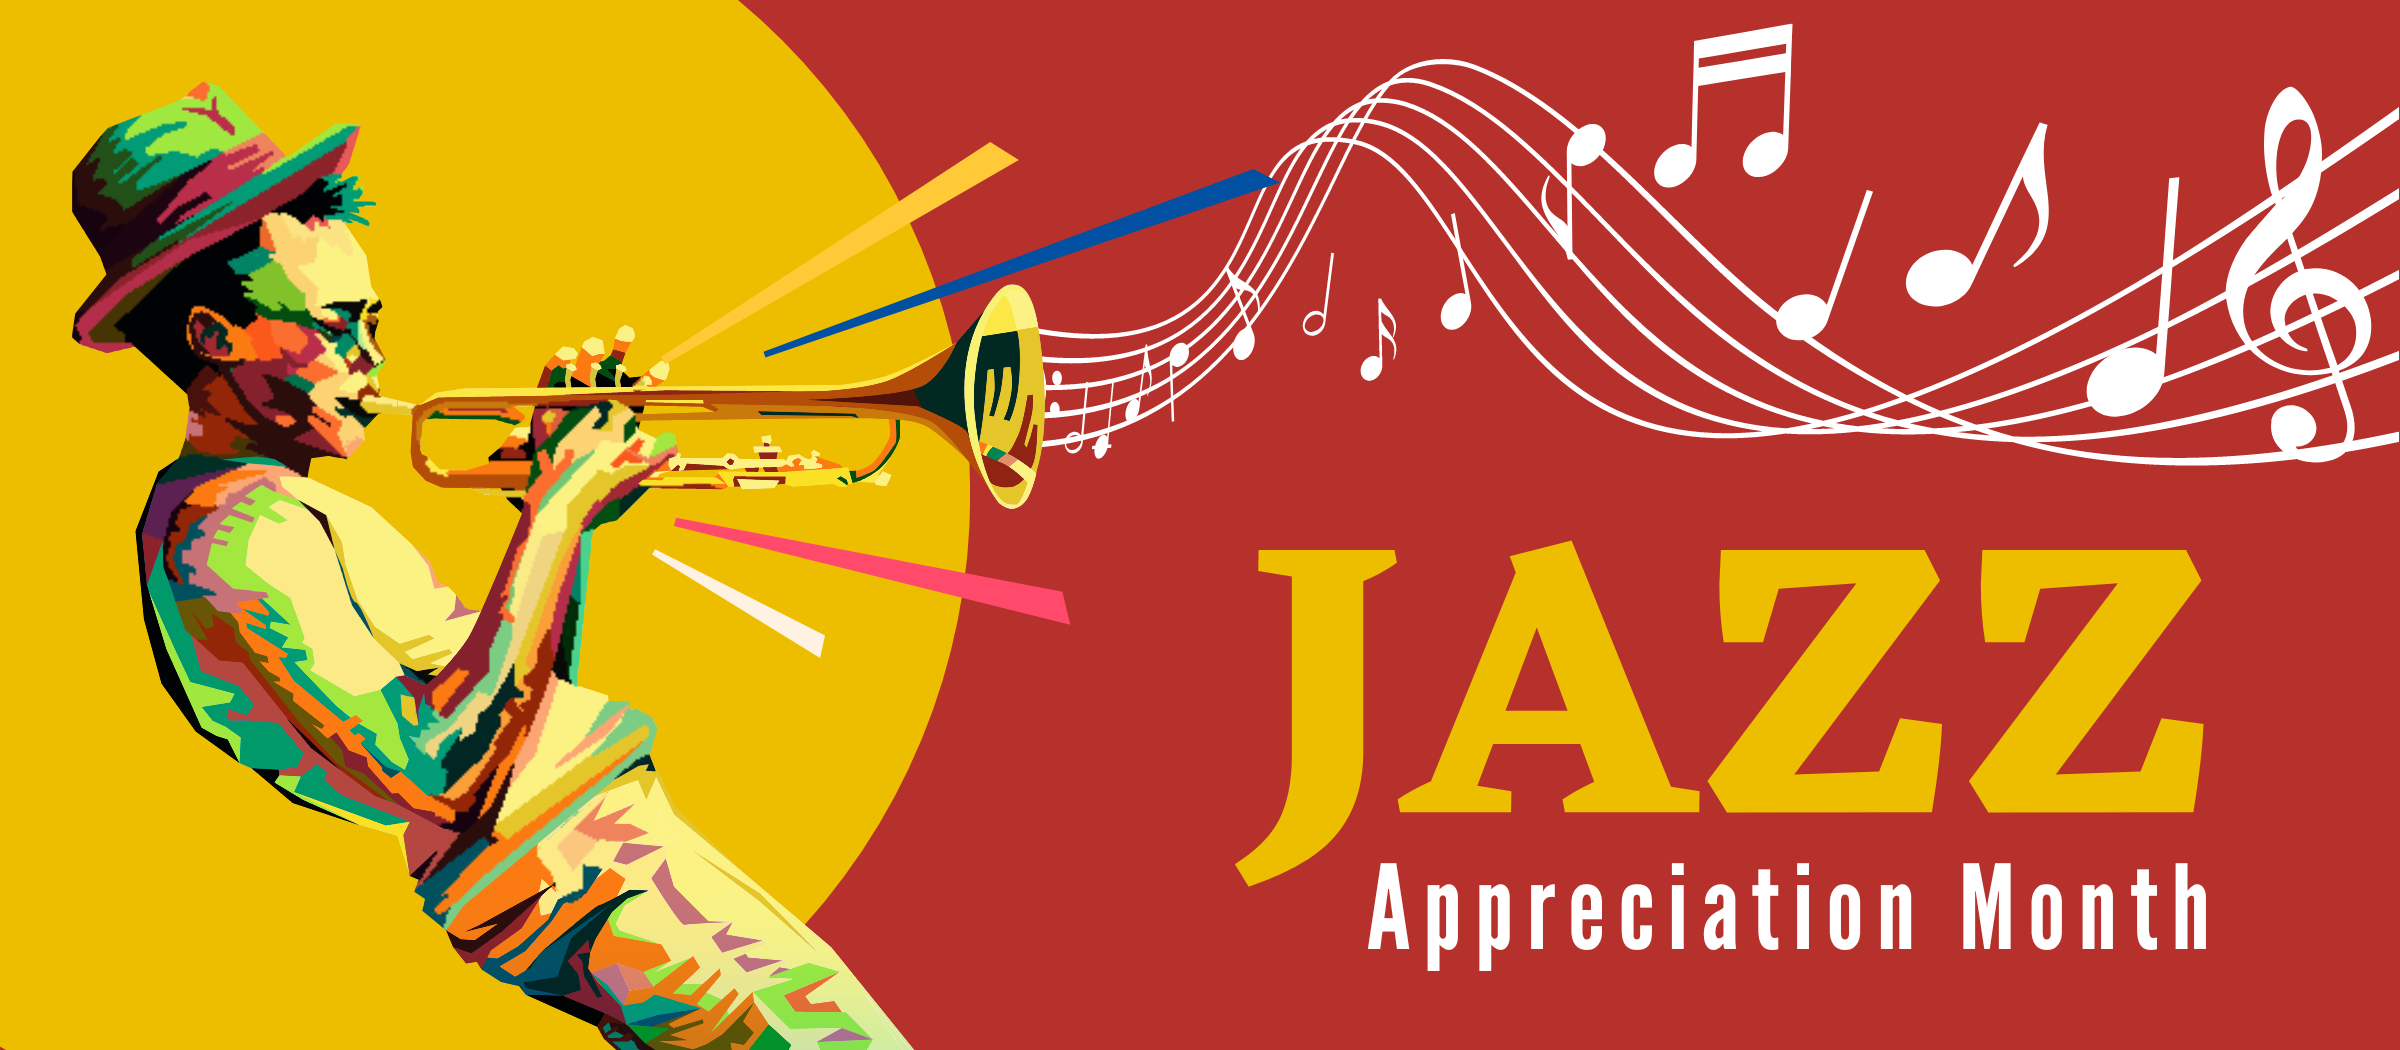 UDC Forward: Jazz appreciation month, Earth Day celebration and Land-grant Open House, CAUSES wins innovative contest, Research Week, Music